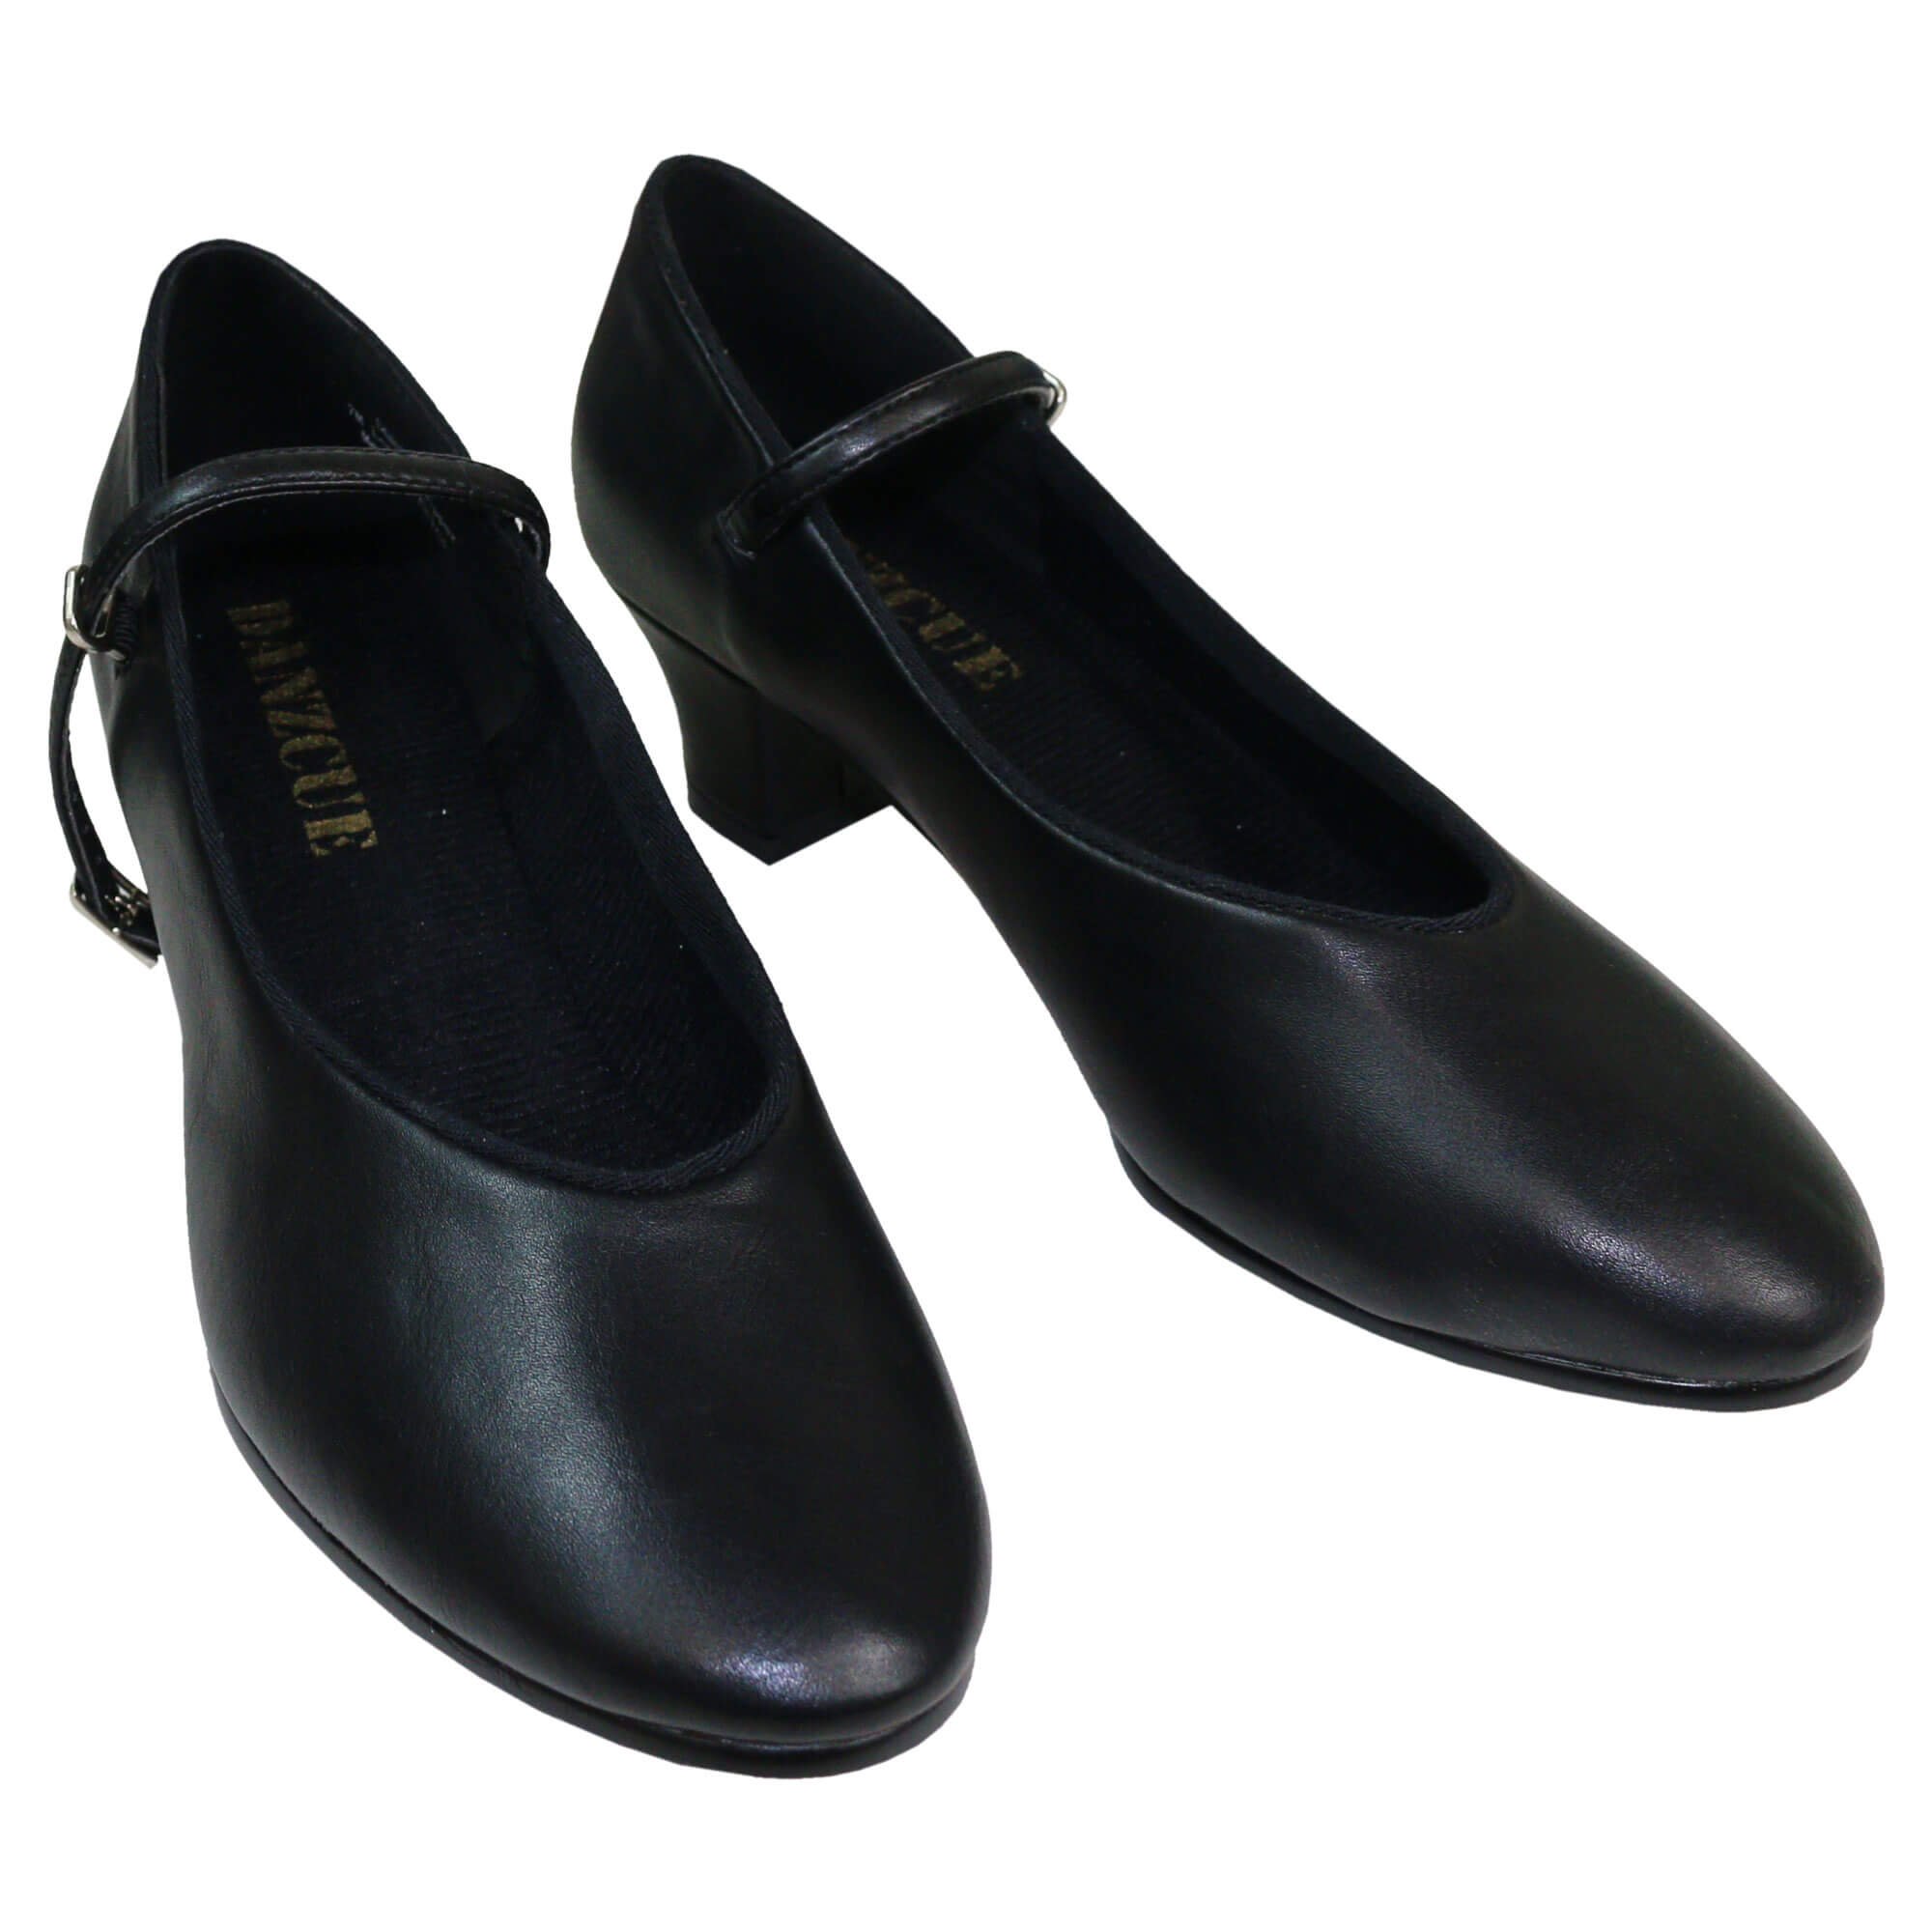 Danzcue 1.5" Character Dance Shoes - Click Image to Close